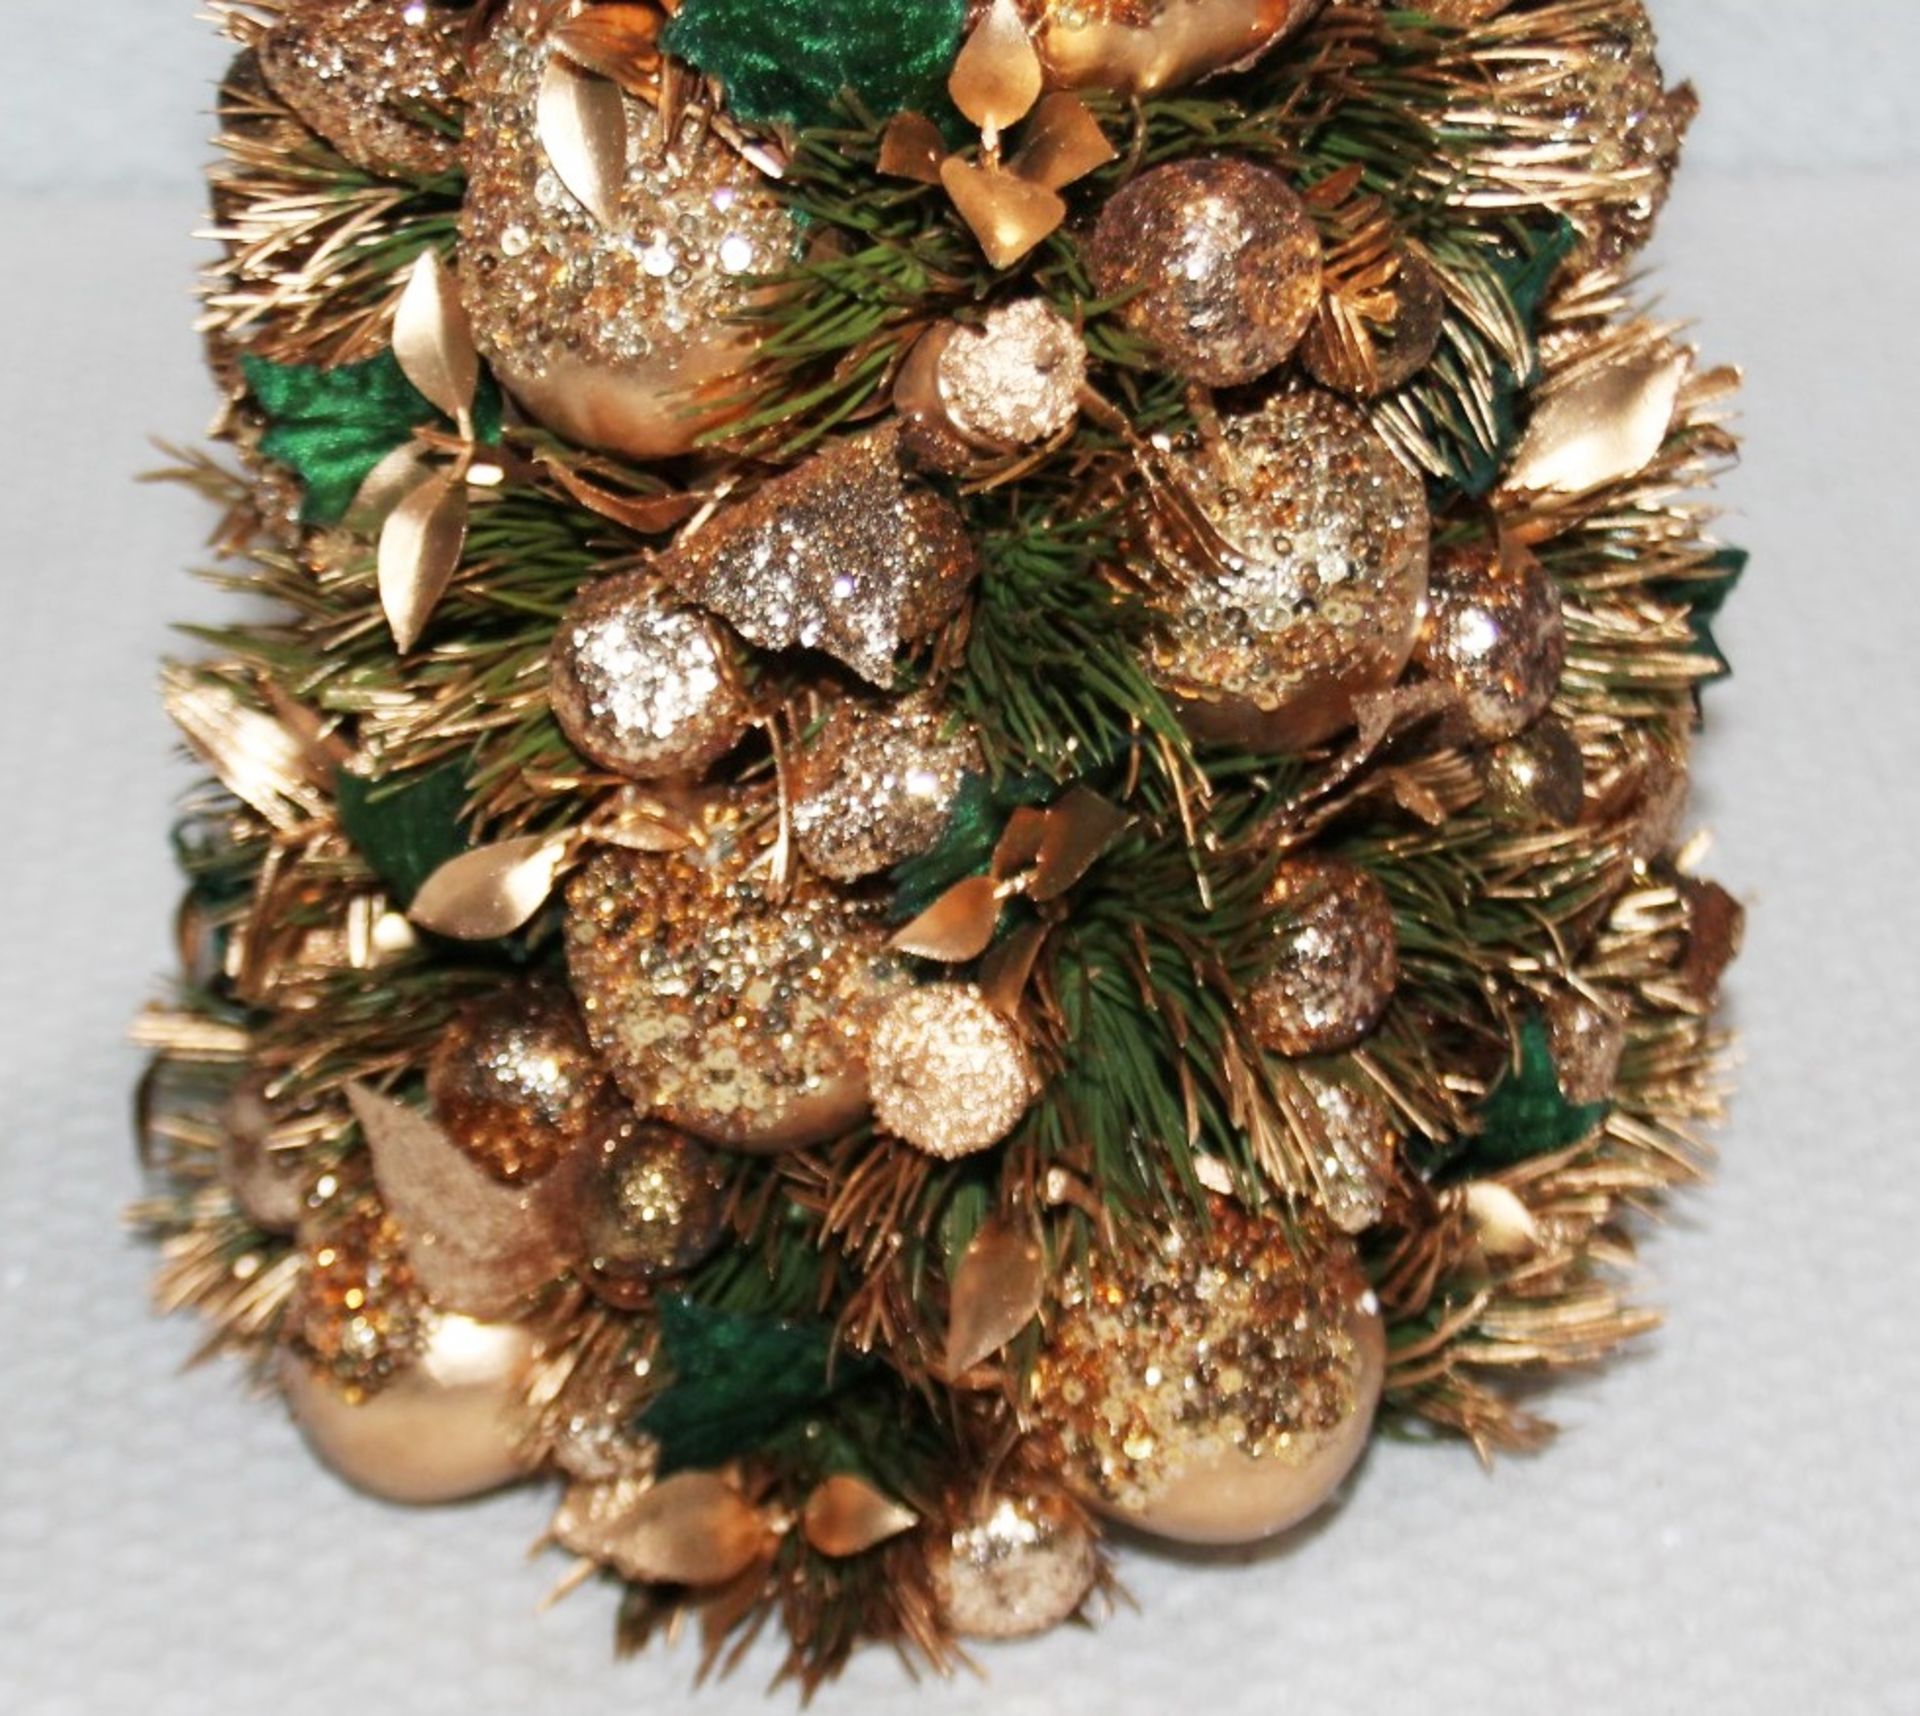 1 x SALZBURG CREATIONS Decorative 'Pear Tree' Ornament In Gold & Green - Original Price £300.00 - Image 9 of 9